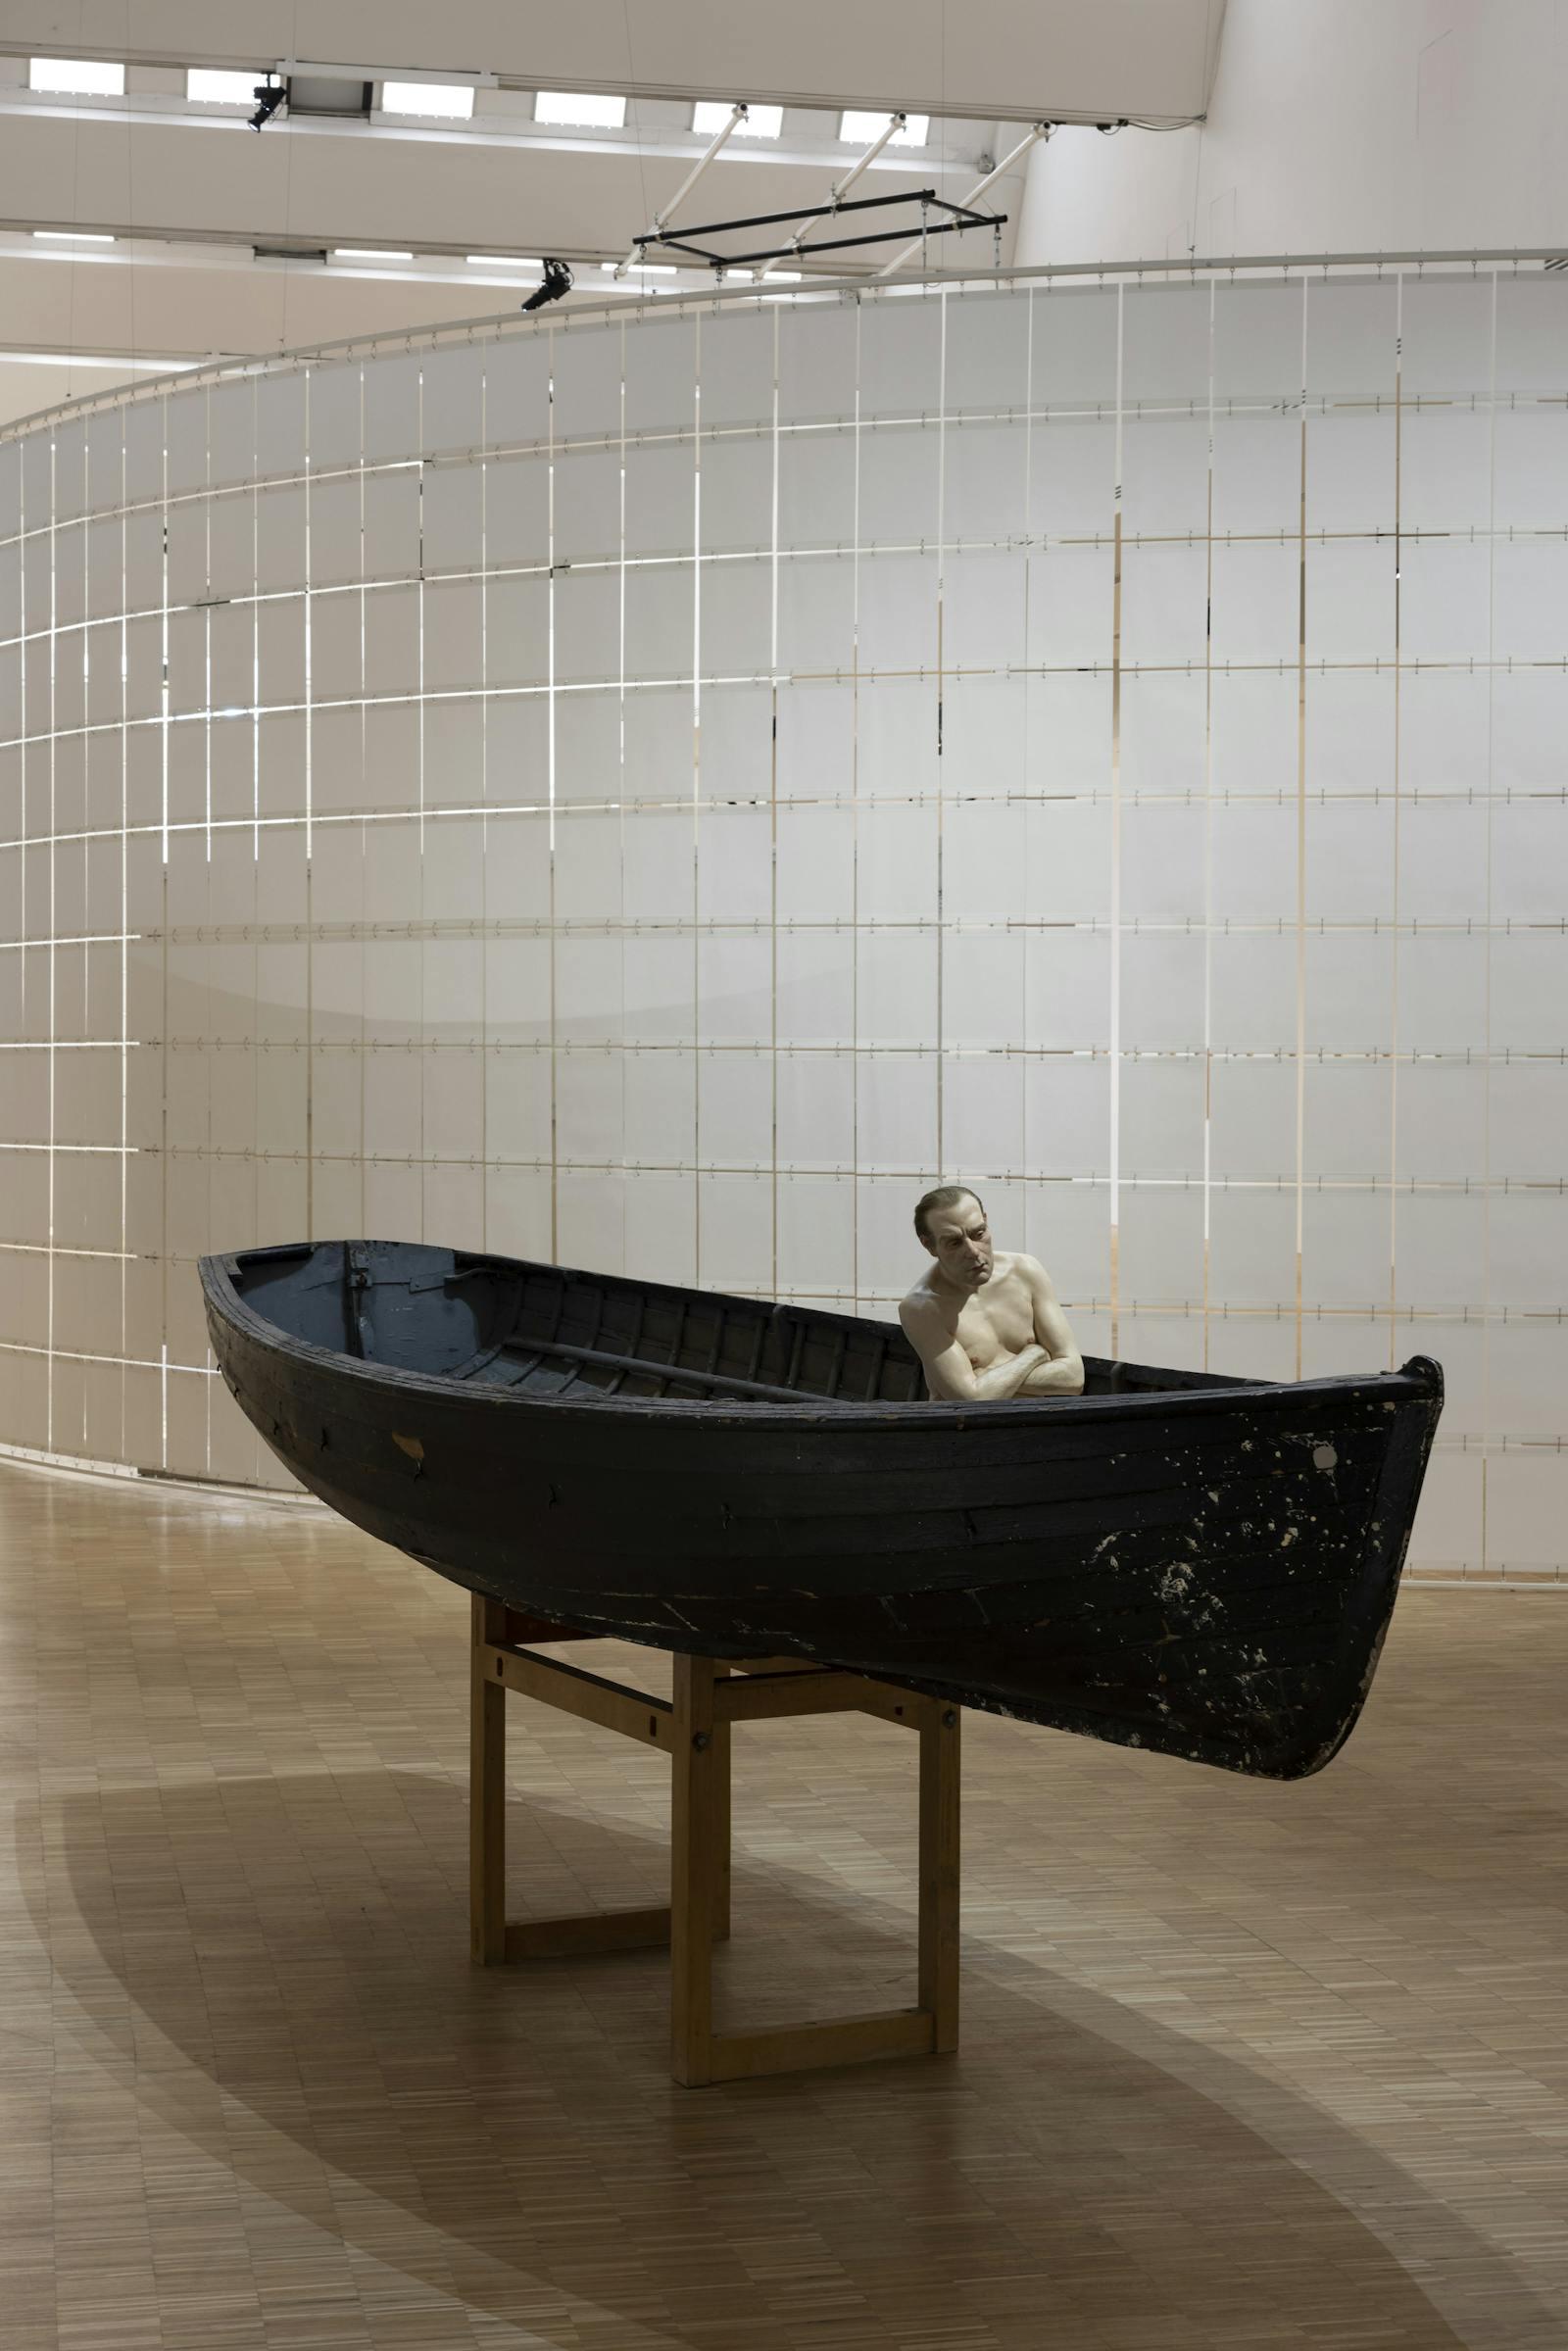 Ron Mueck, Man in a Boat, installation view, ph. Andrea Rossetti